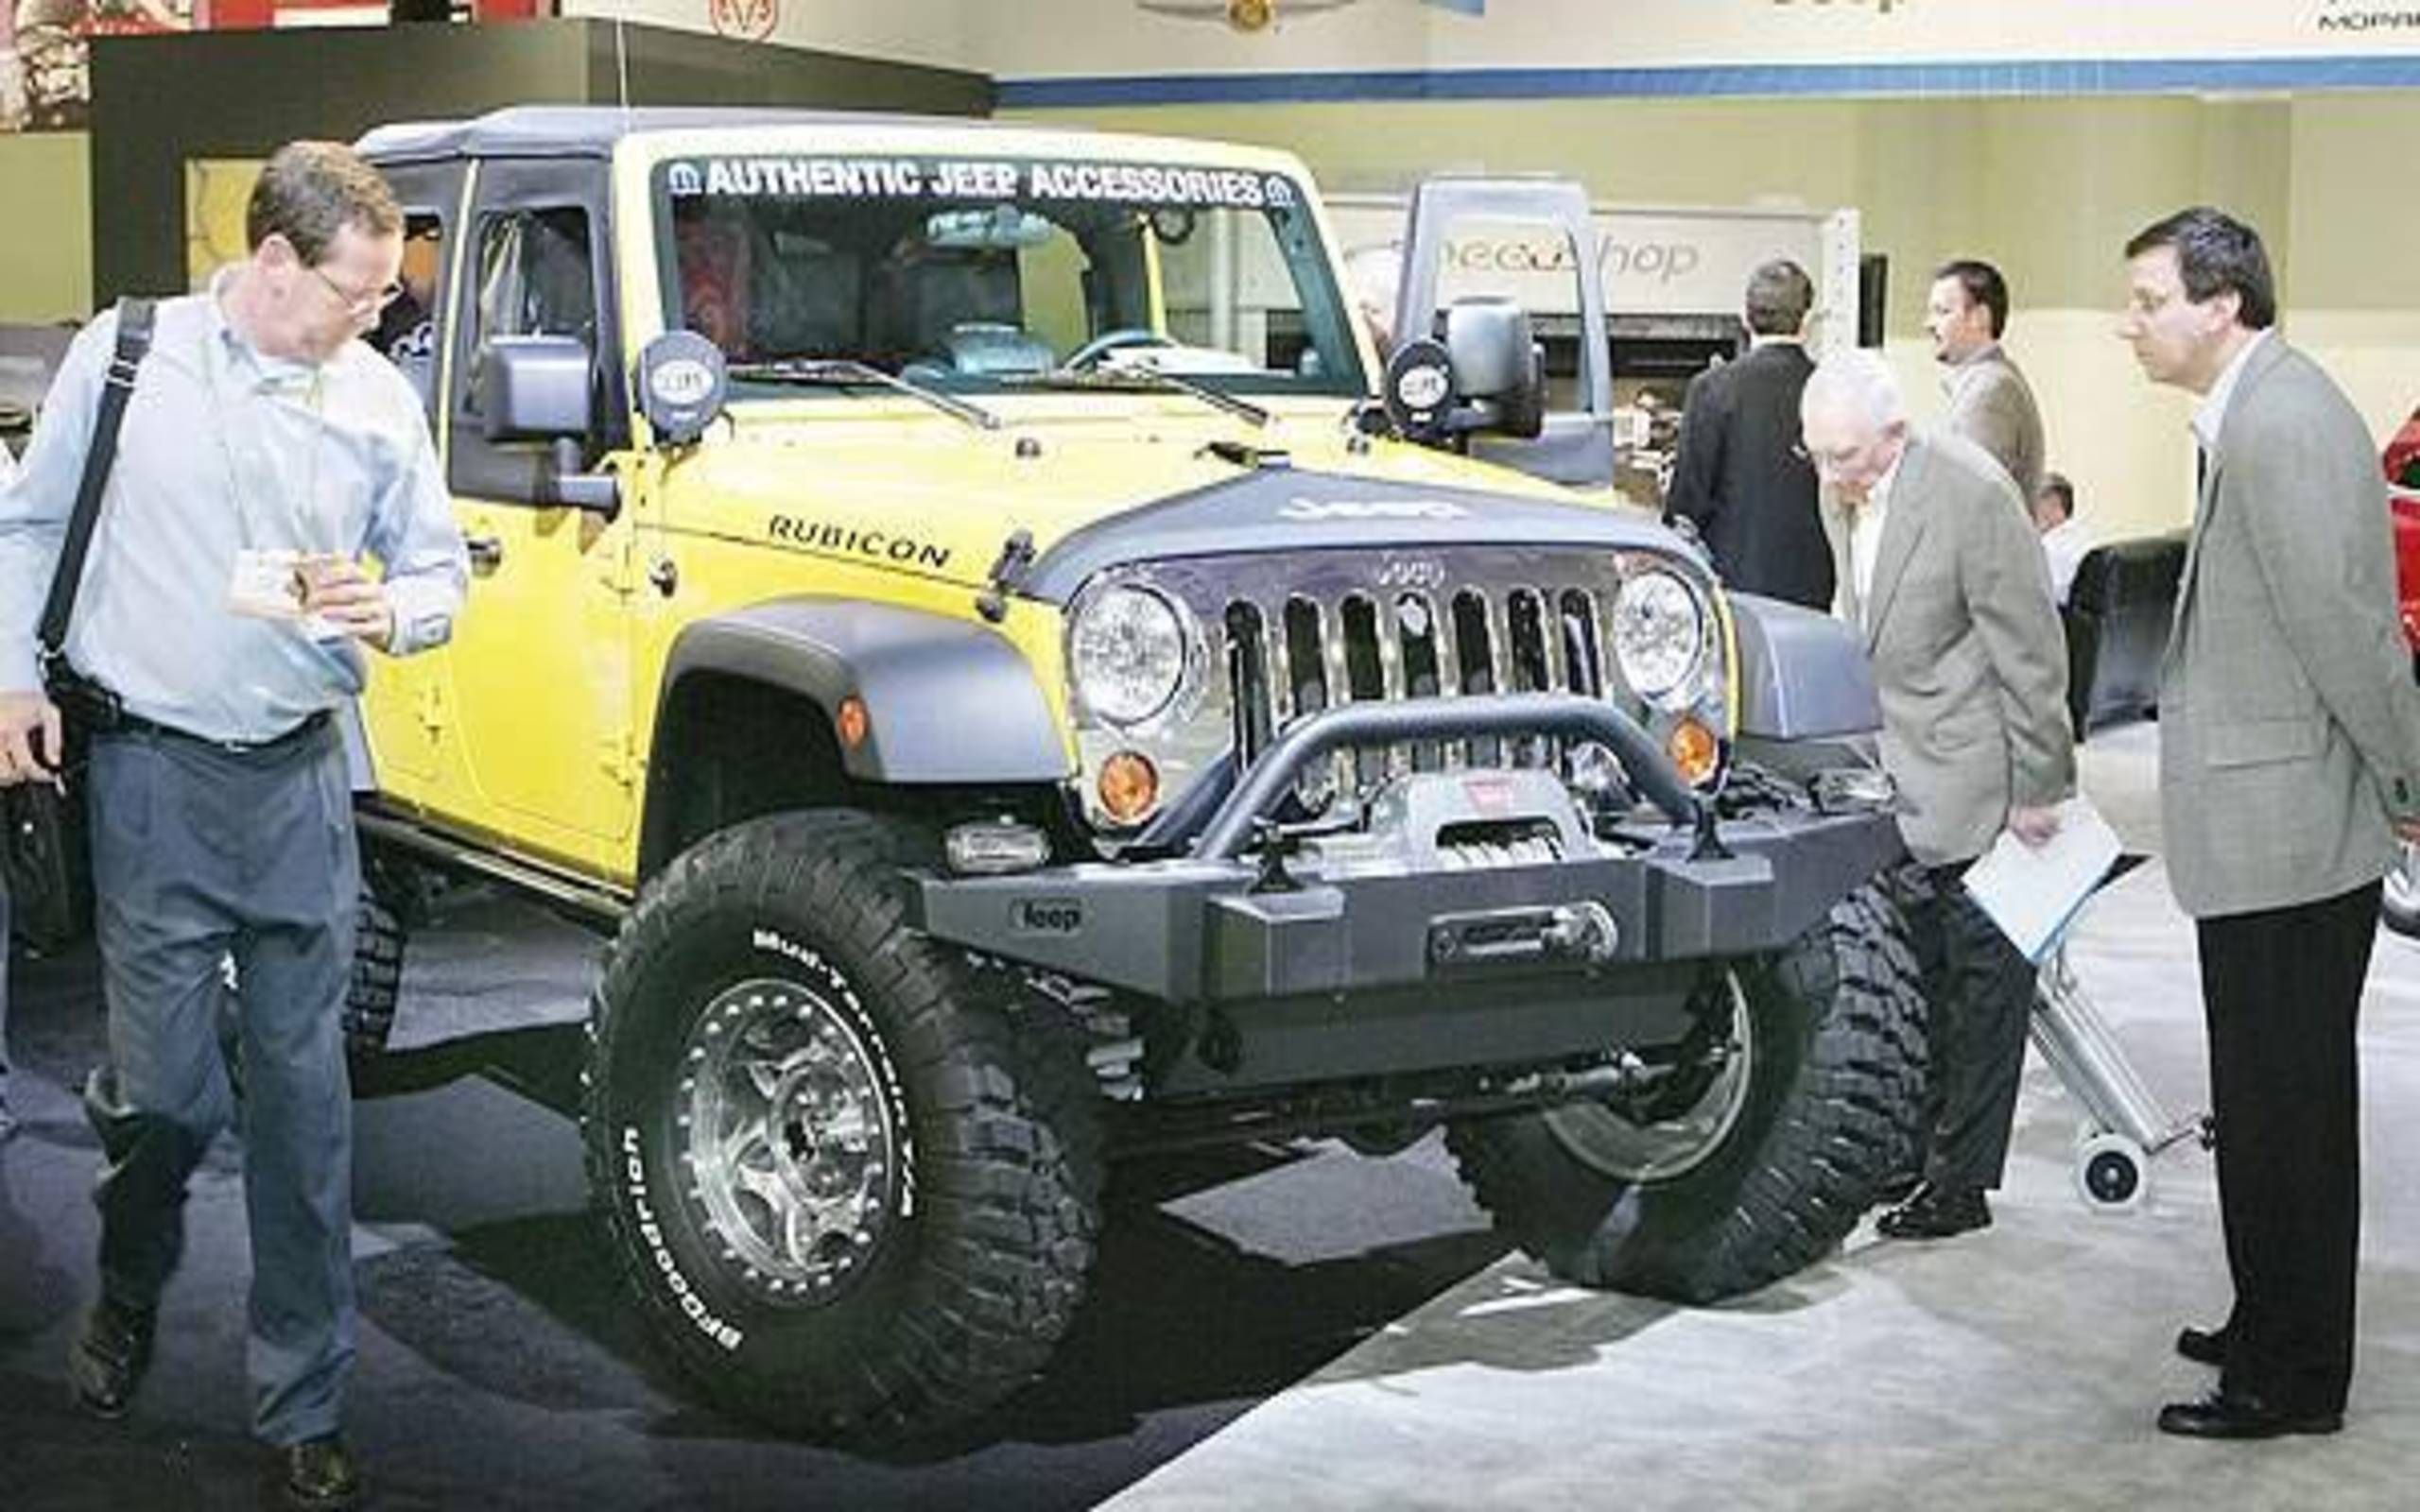 Jeep accessories: Mo' for Mopar: Performance-parts brand wants to team with  dealers to outfit new buyers' vehicles